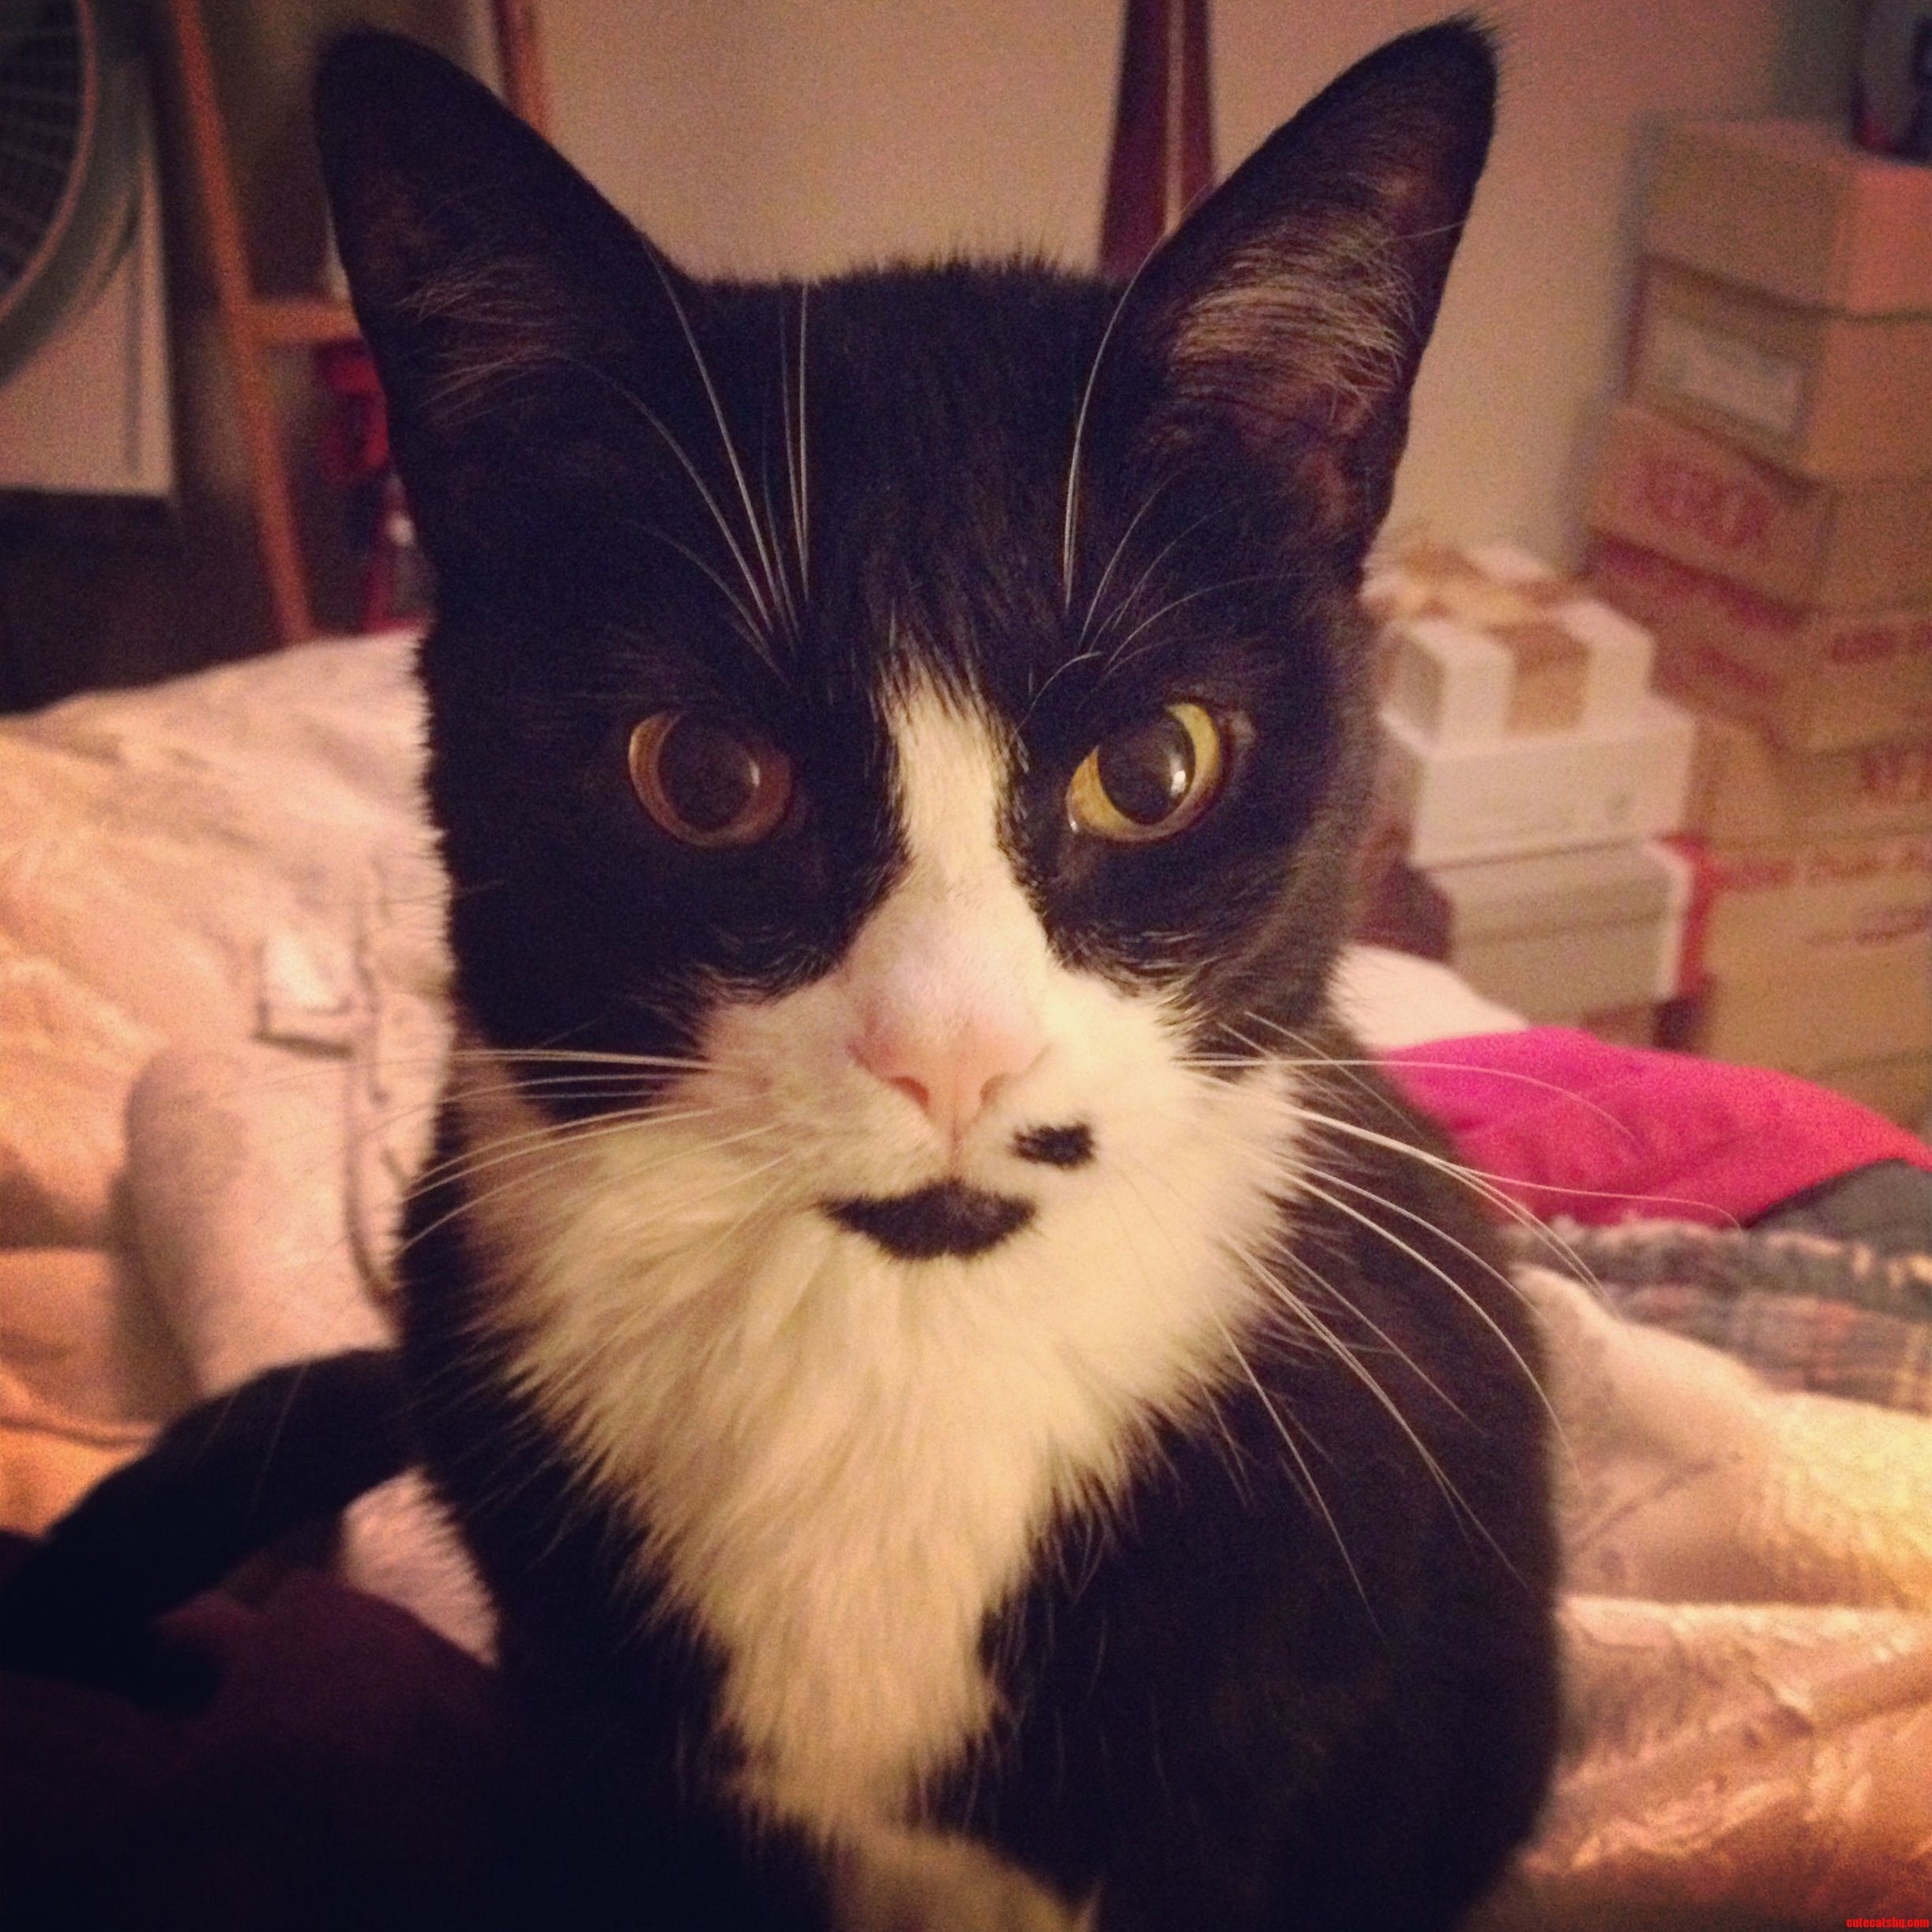 This Is My Cat Mitzi And What My Friends Call Her Half-Stache.